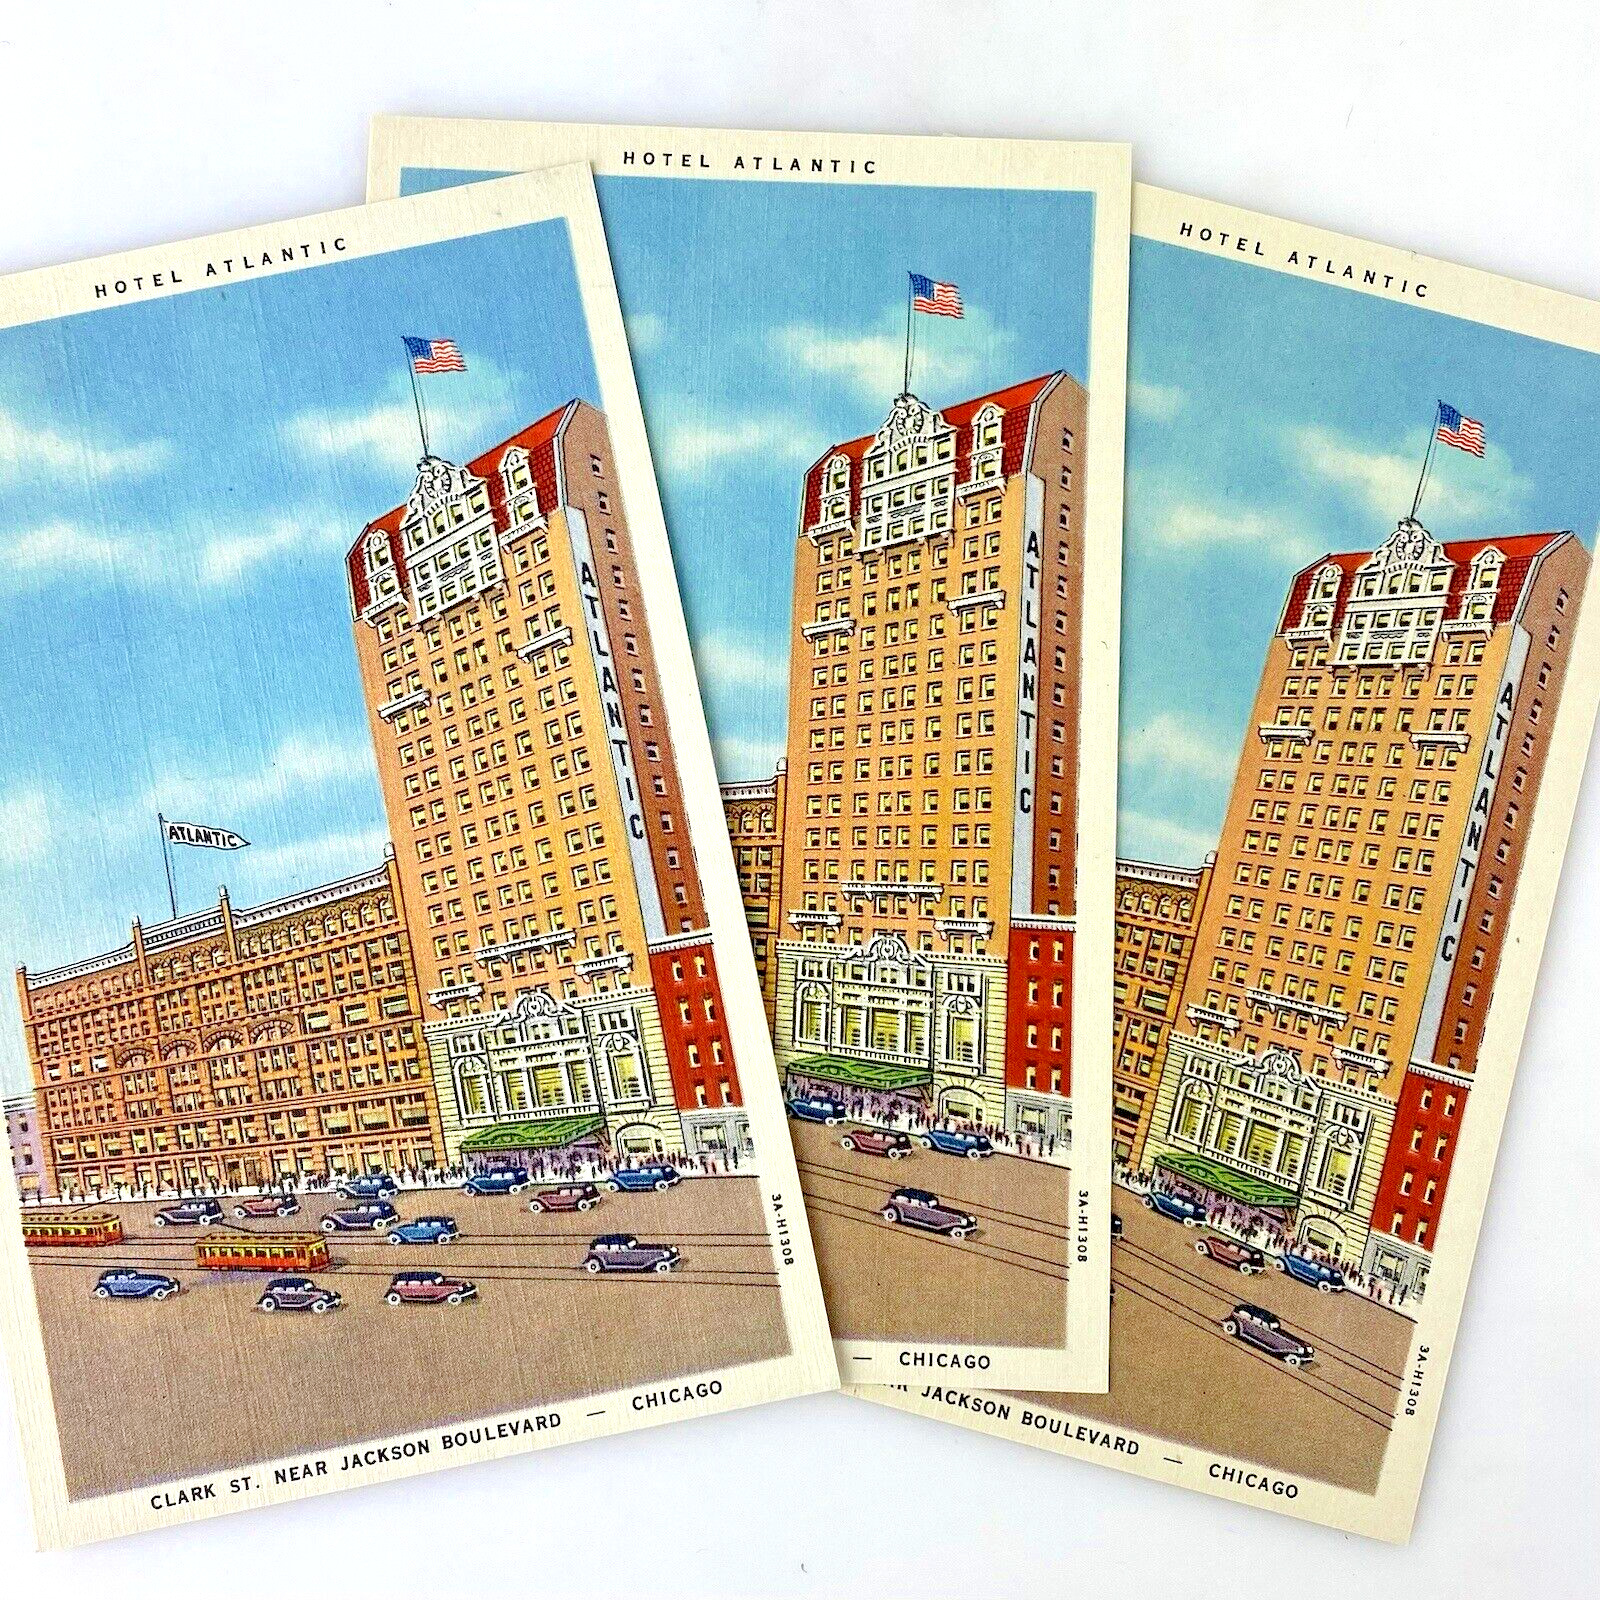 VINTAGE HOTEL ATLANTIC CHICAGO ILLINOIS POSTCARDS Blank Unposted Divided Travel